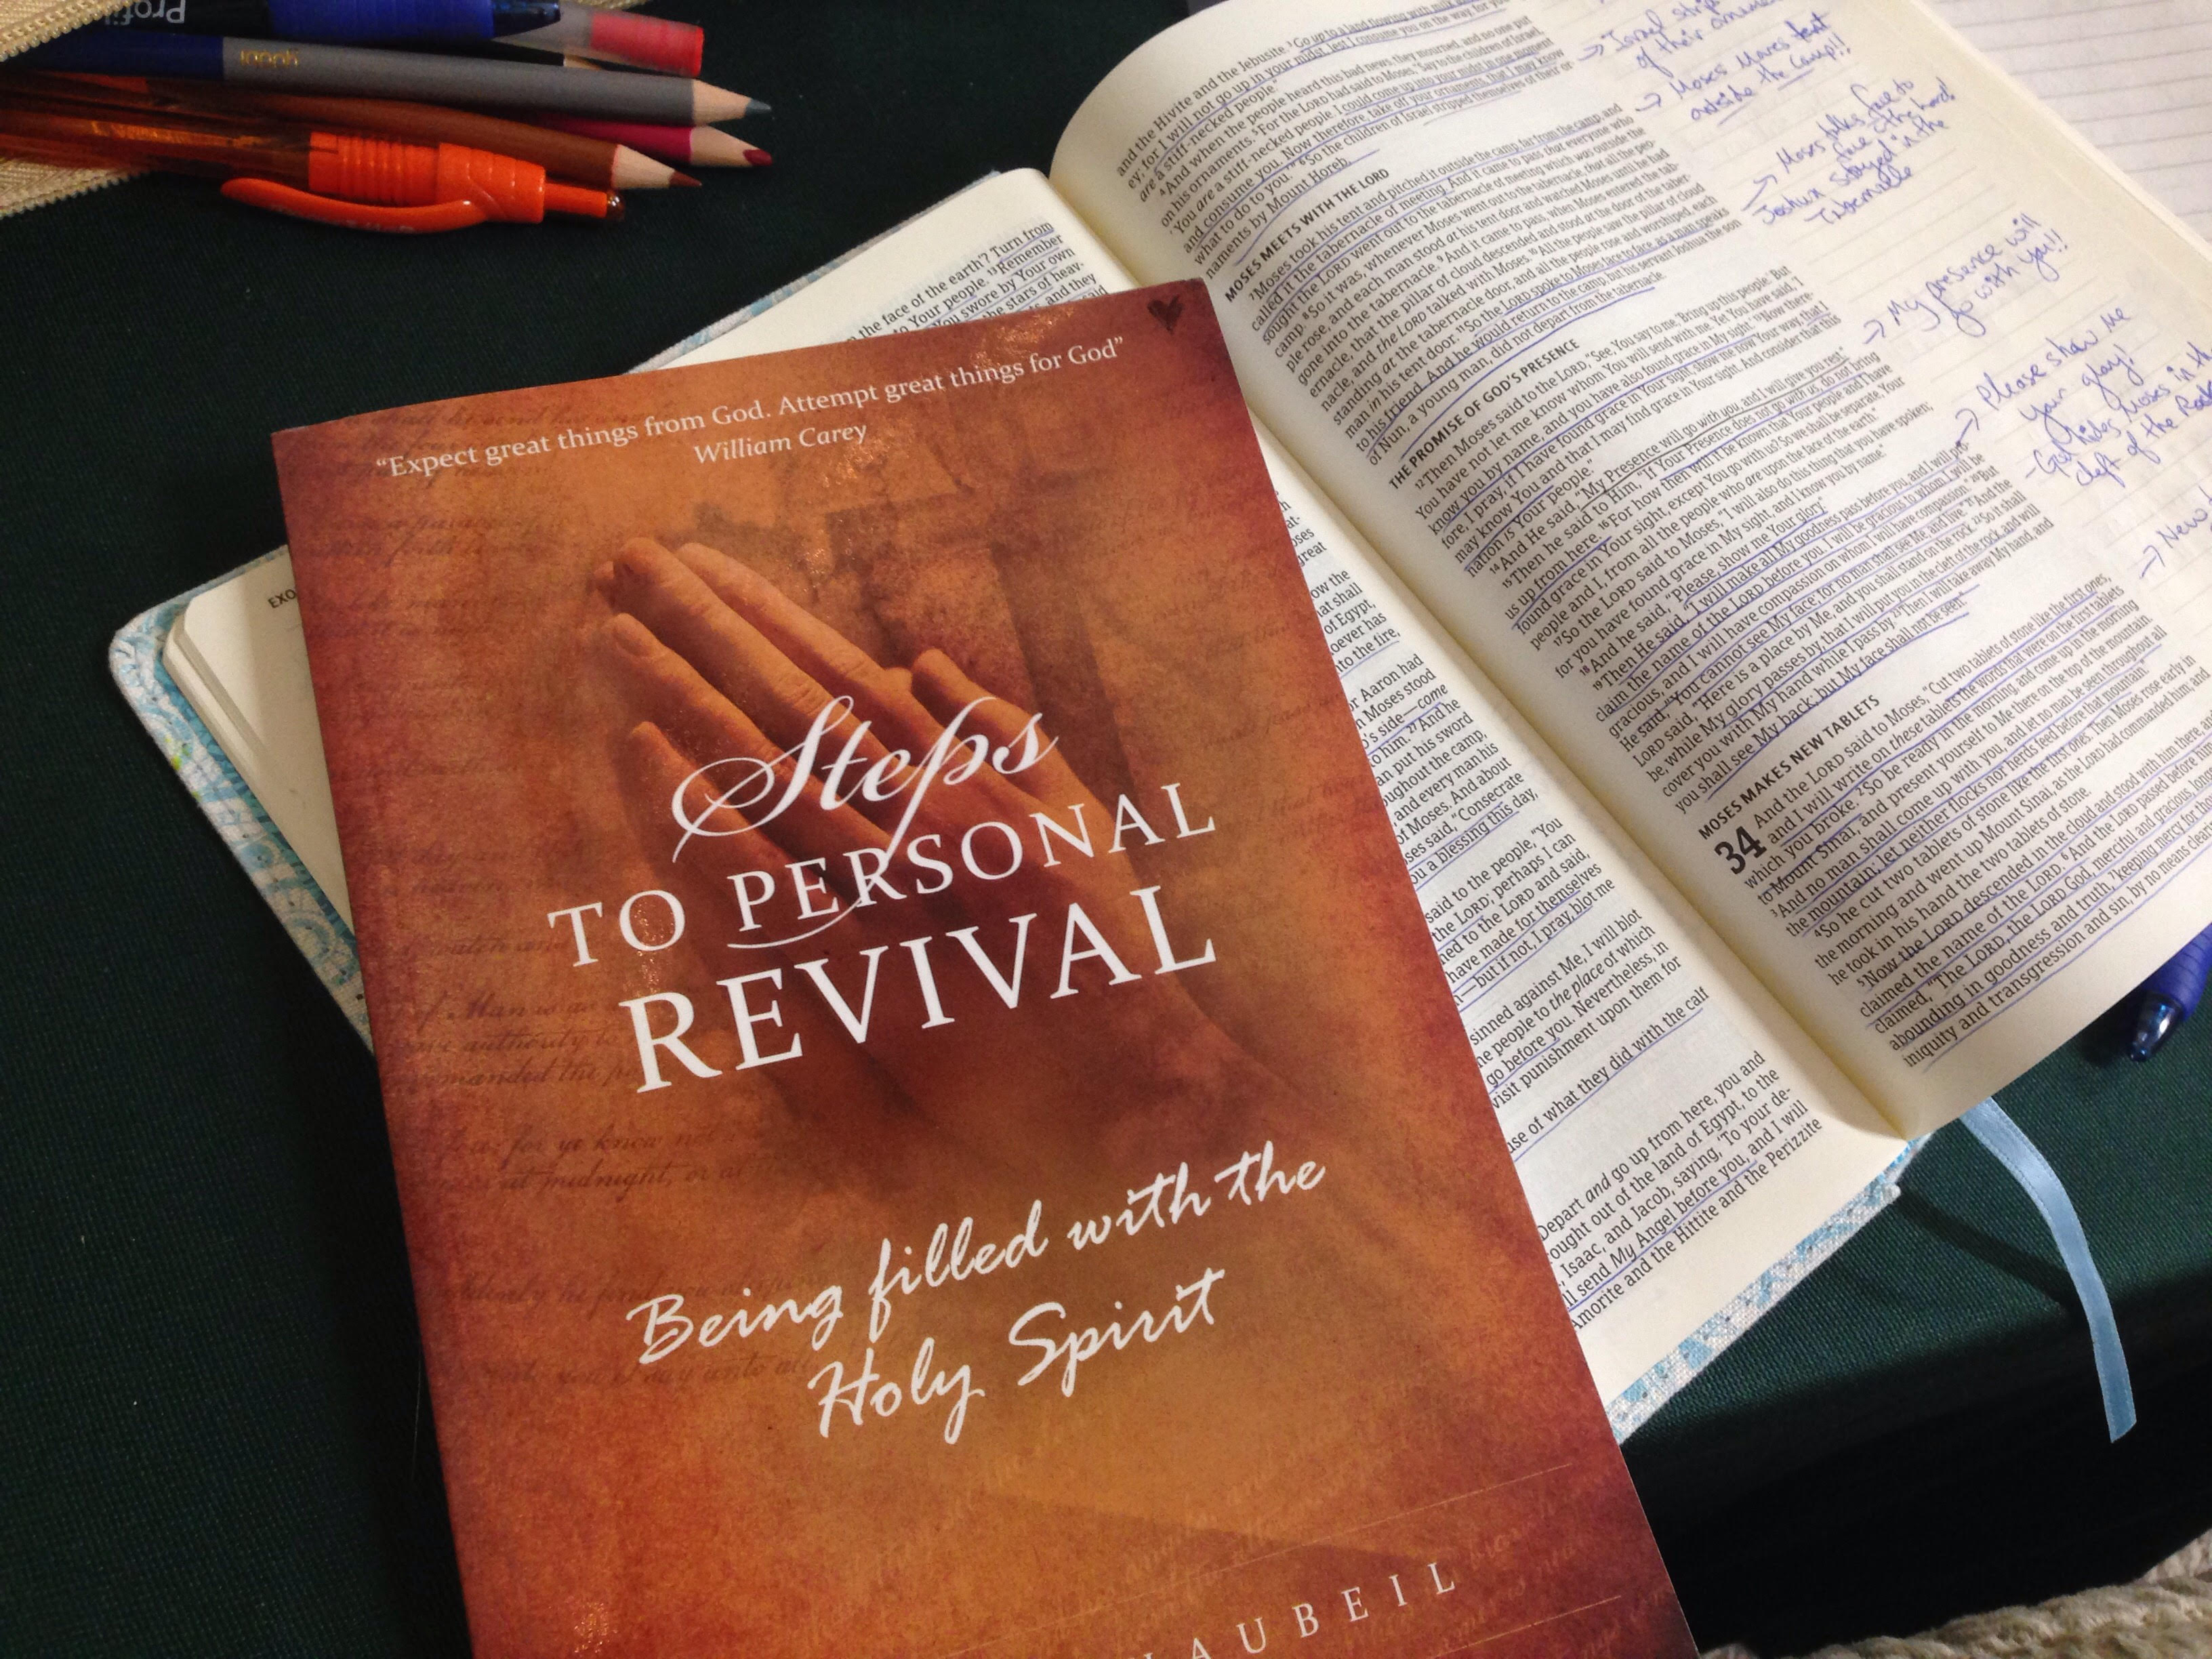 How Steps to Personal Revival Has Changed My Life